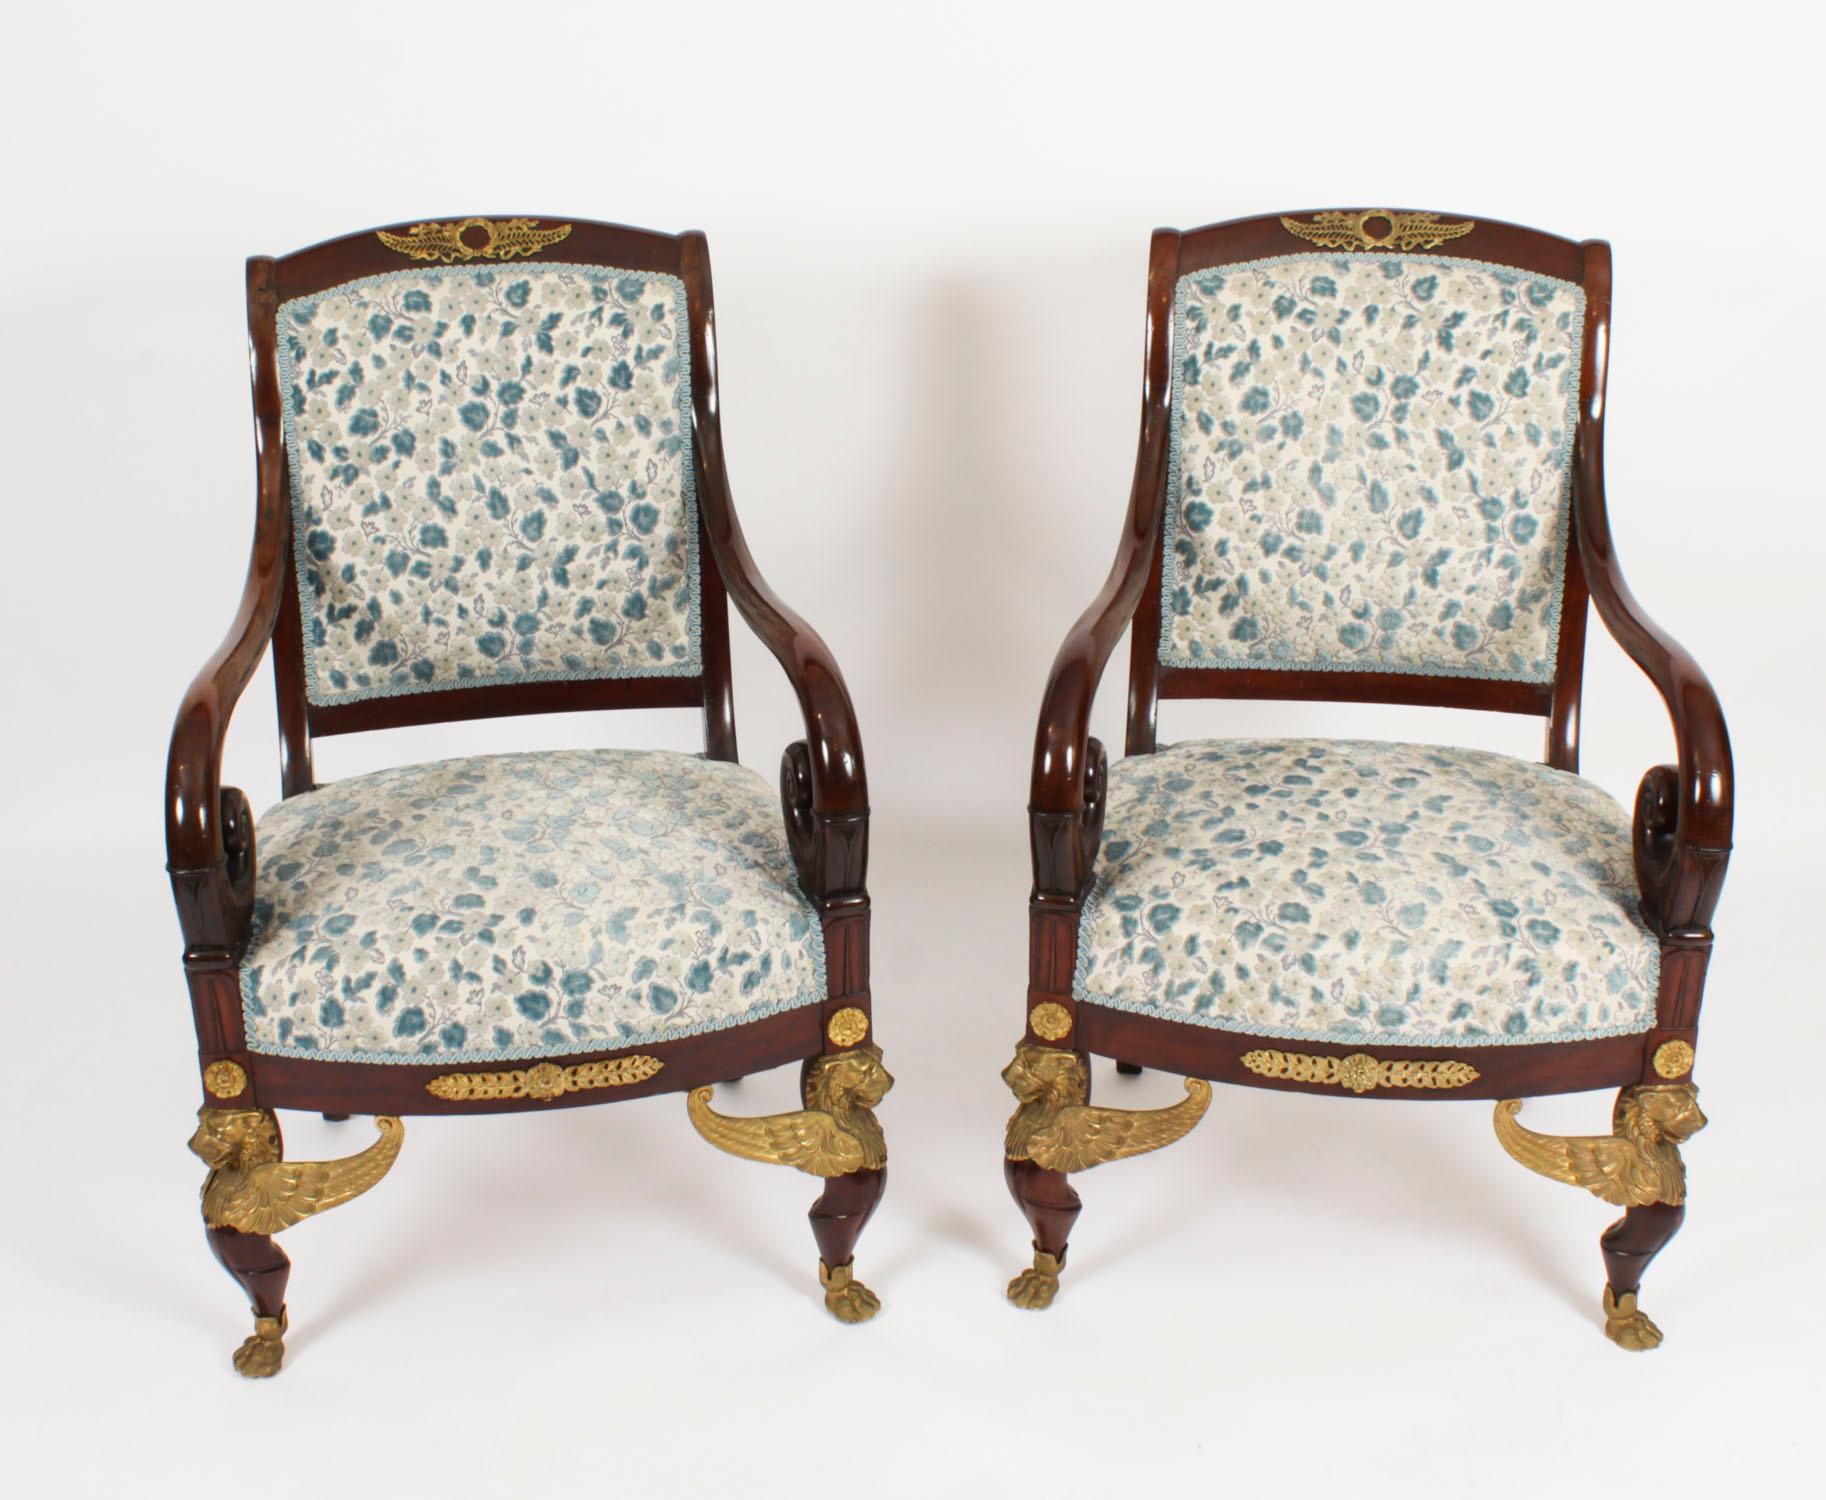 This is a fantastic and highly decorative antique set of four of French ormolu mounted Empire fauteuil armchairs,  circa 1870 in date.
They feature scrolled square padded backs mounted with laurel and anthemion ormolu mounts above stuff-over seats